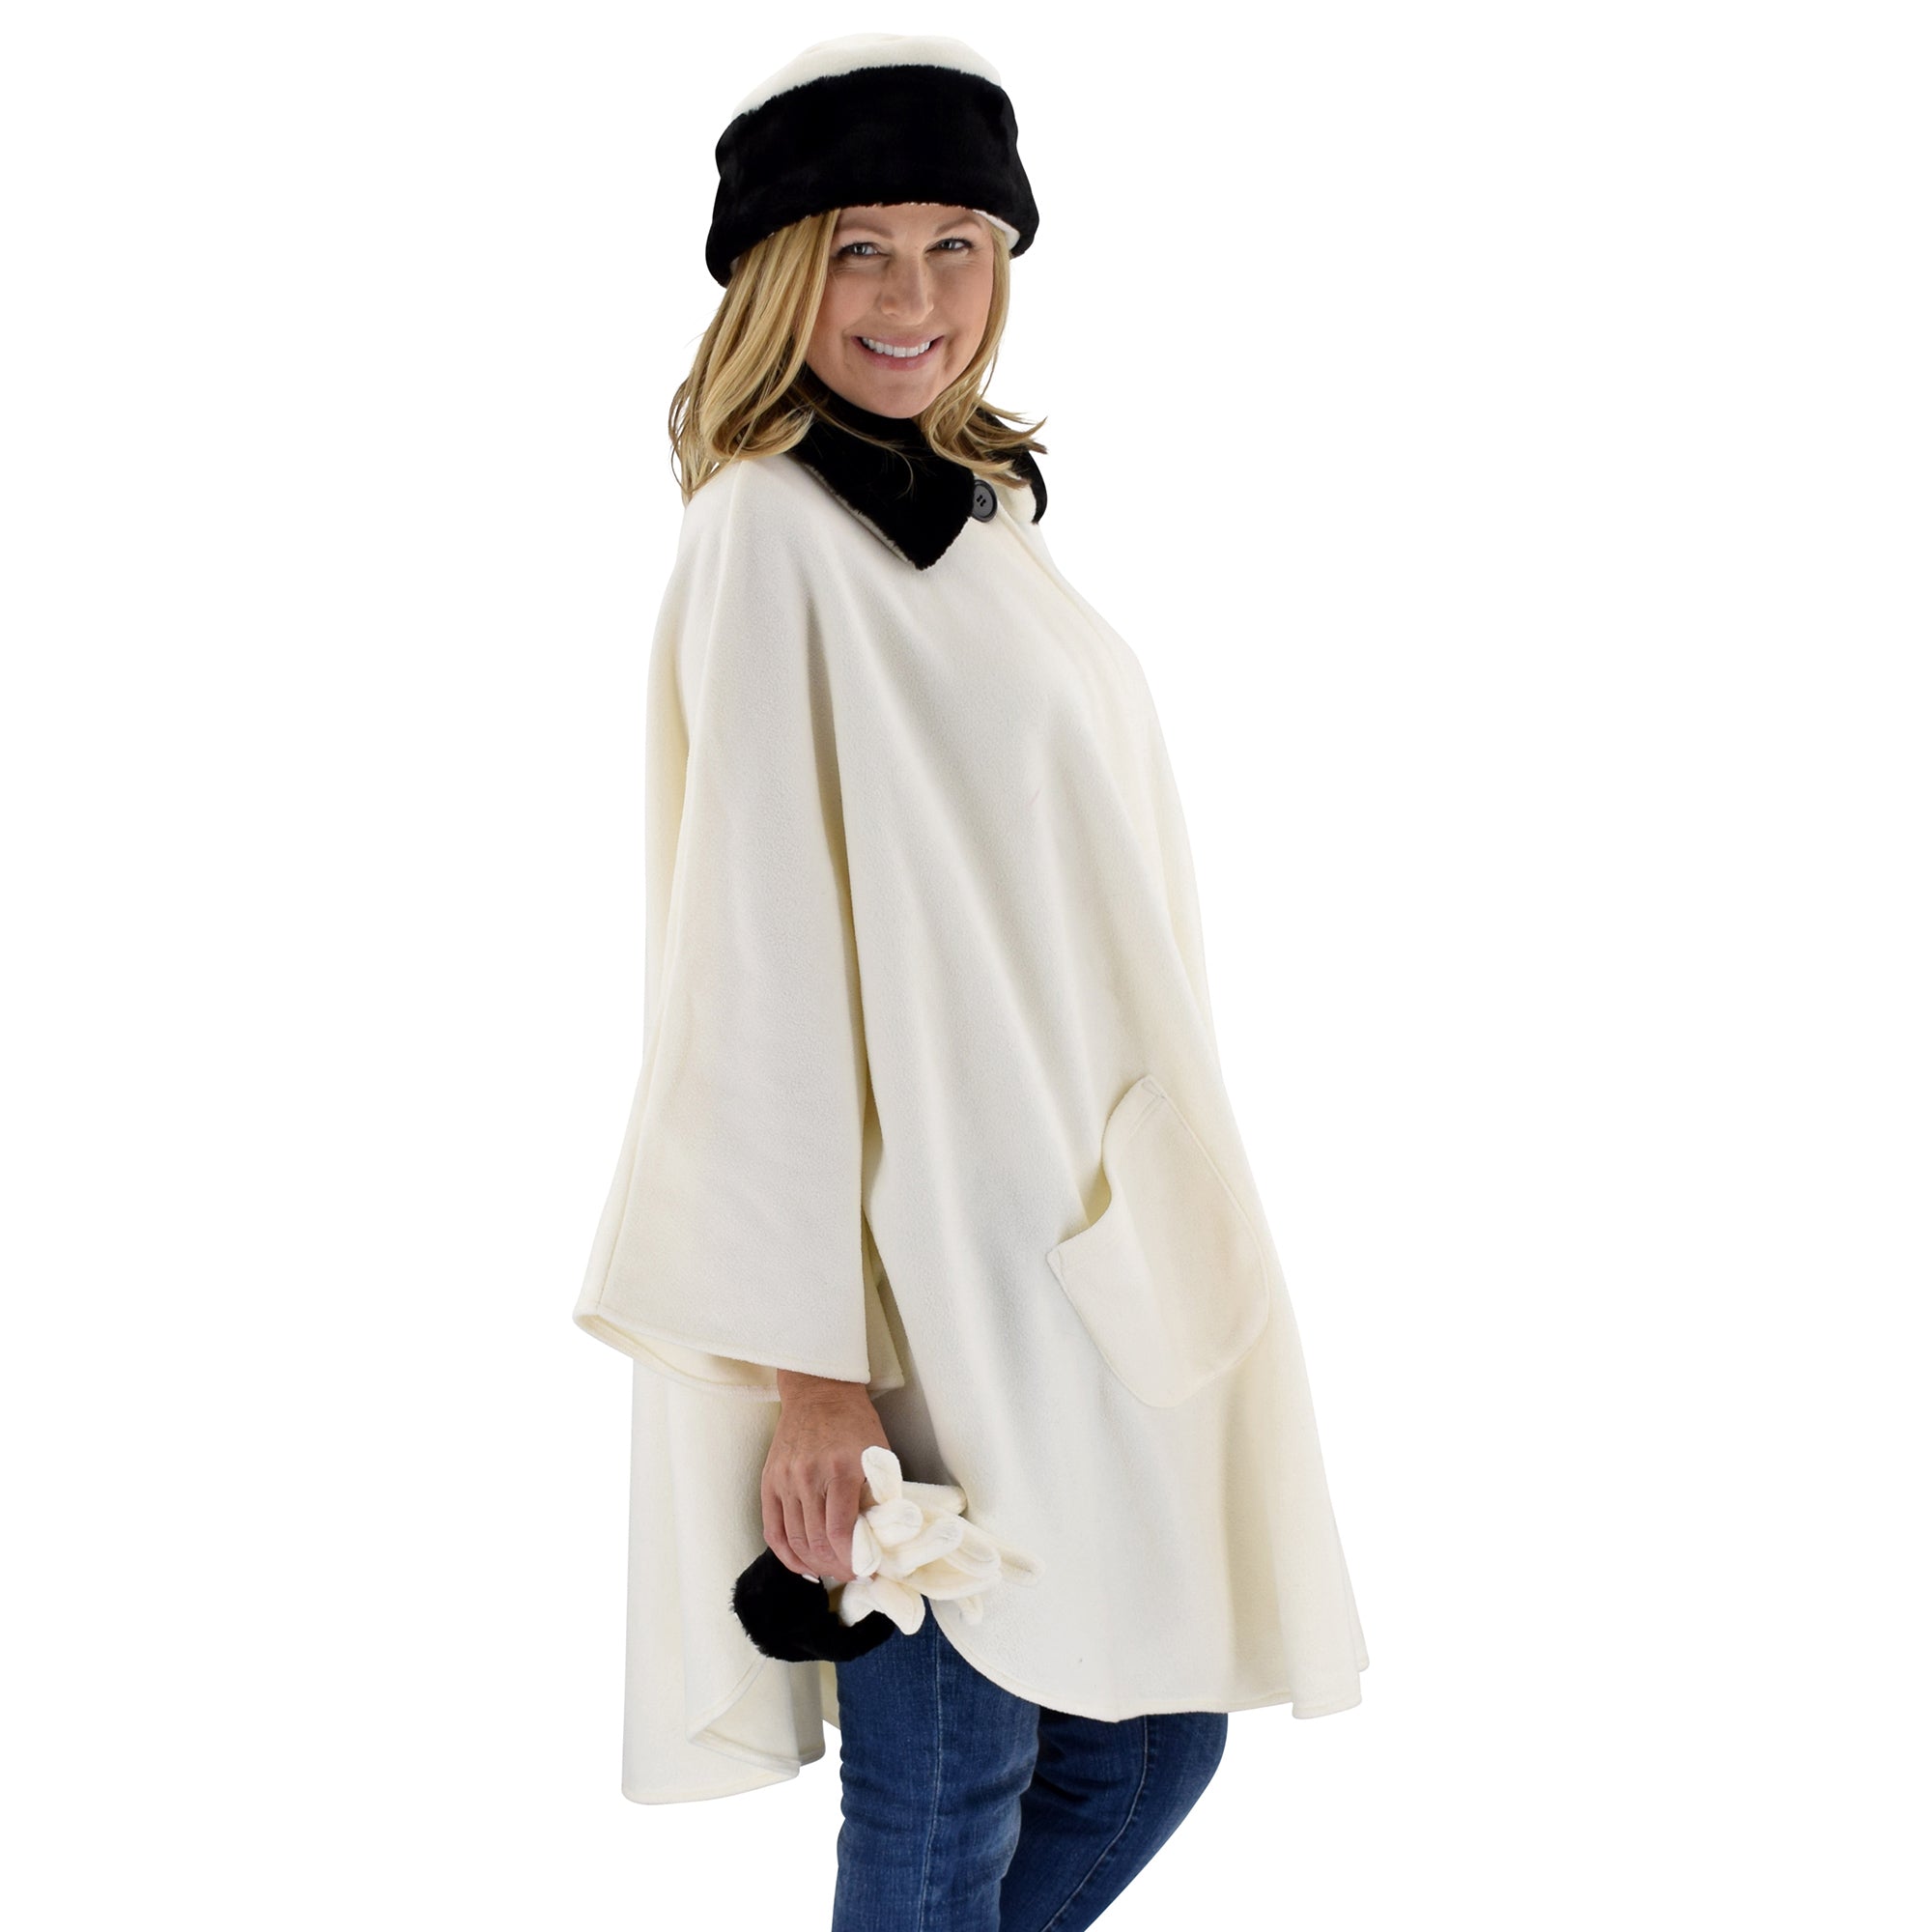 Le Moda Women's Black Fur Collar Polar Fleece Wrap with Matching Gloves and Hat-One Size Fits All at Linda Anderson. color_winter_white